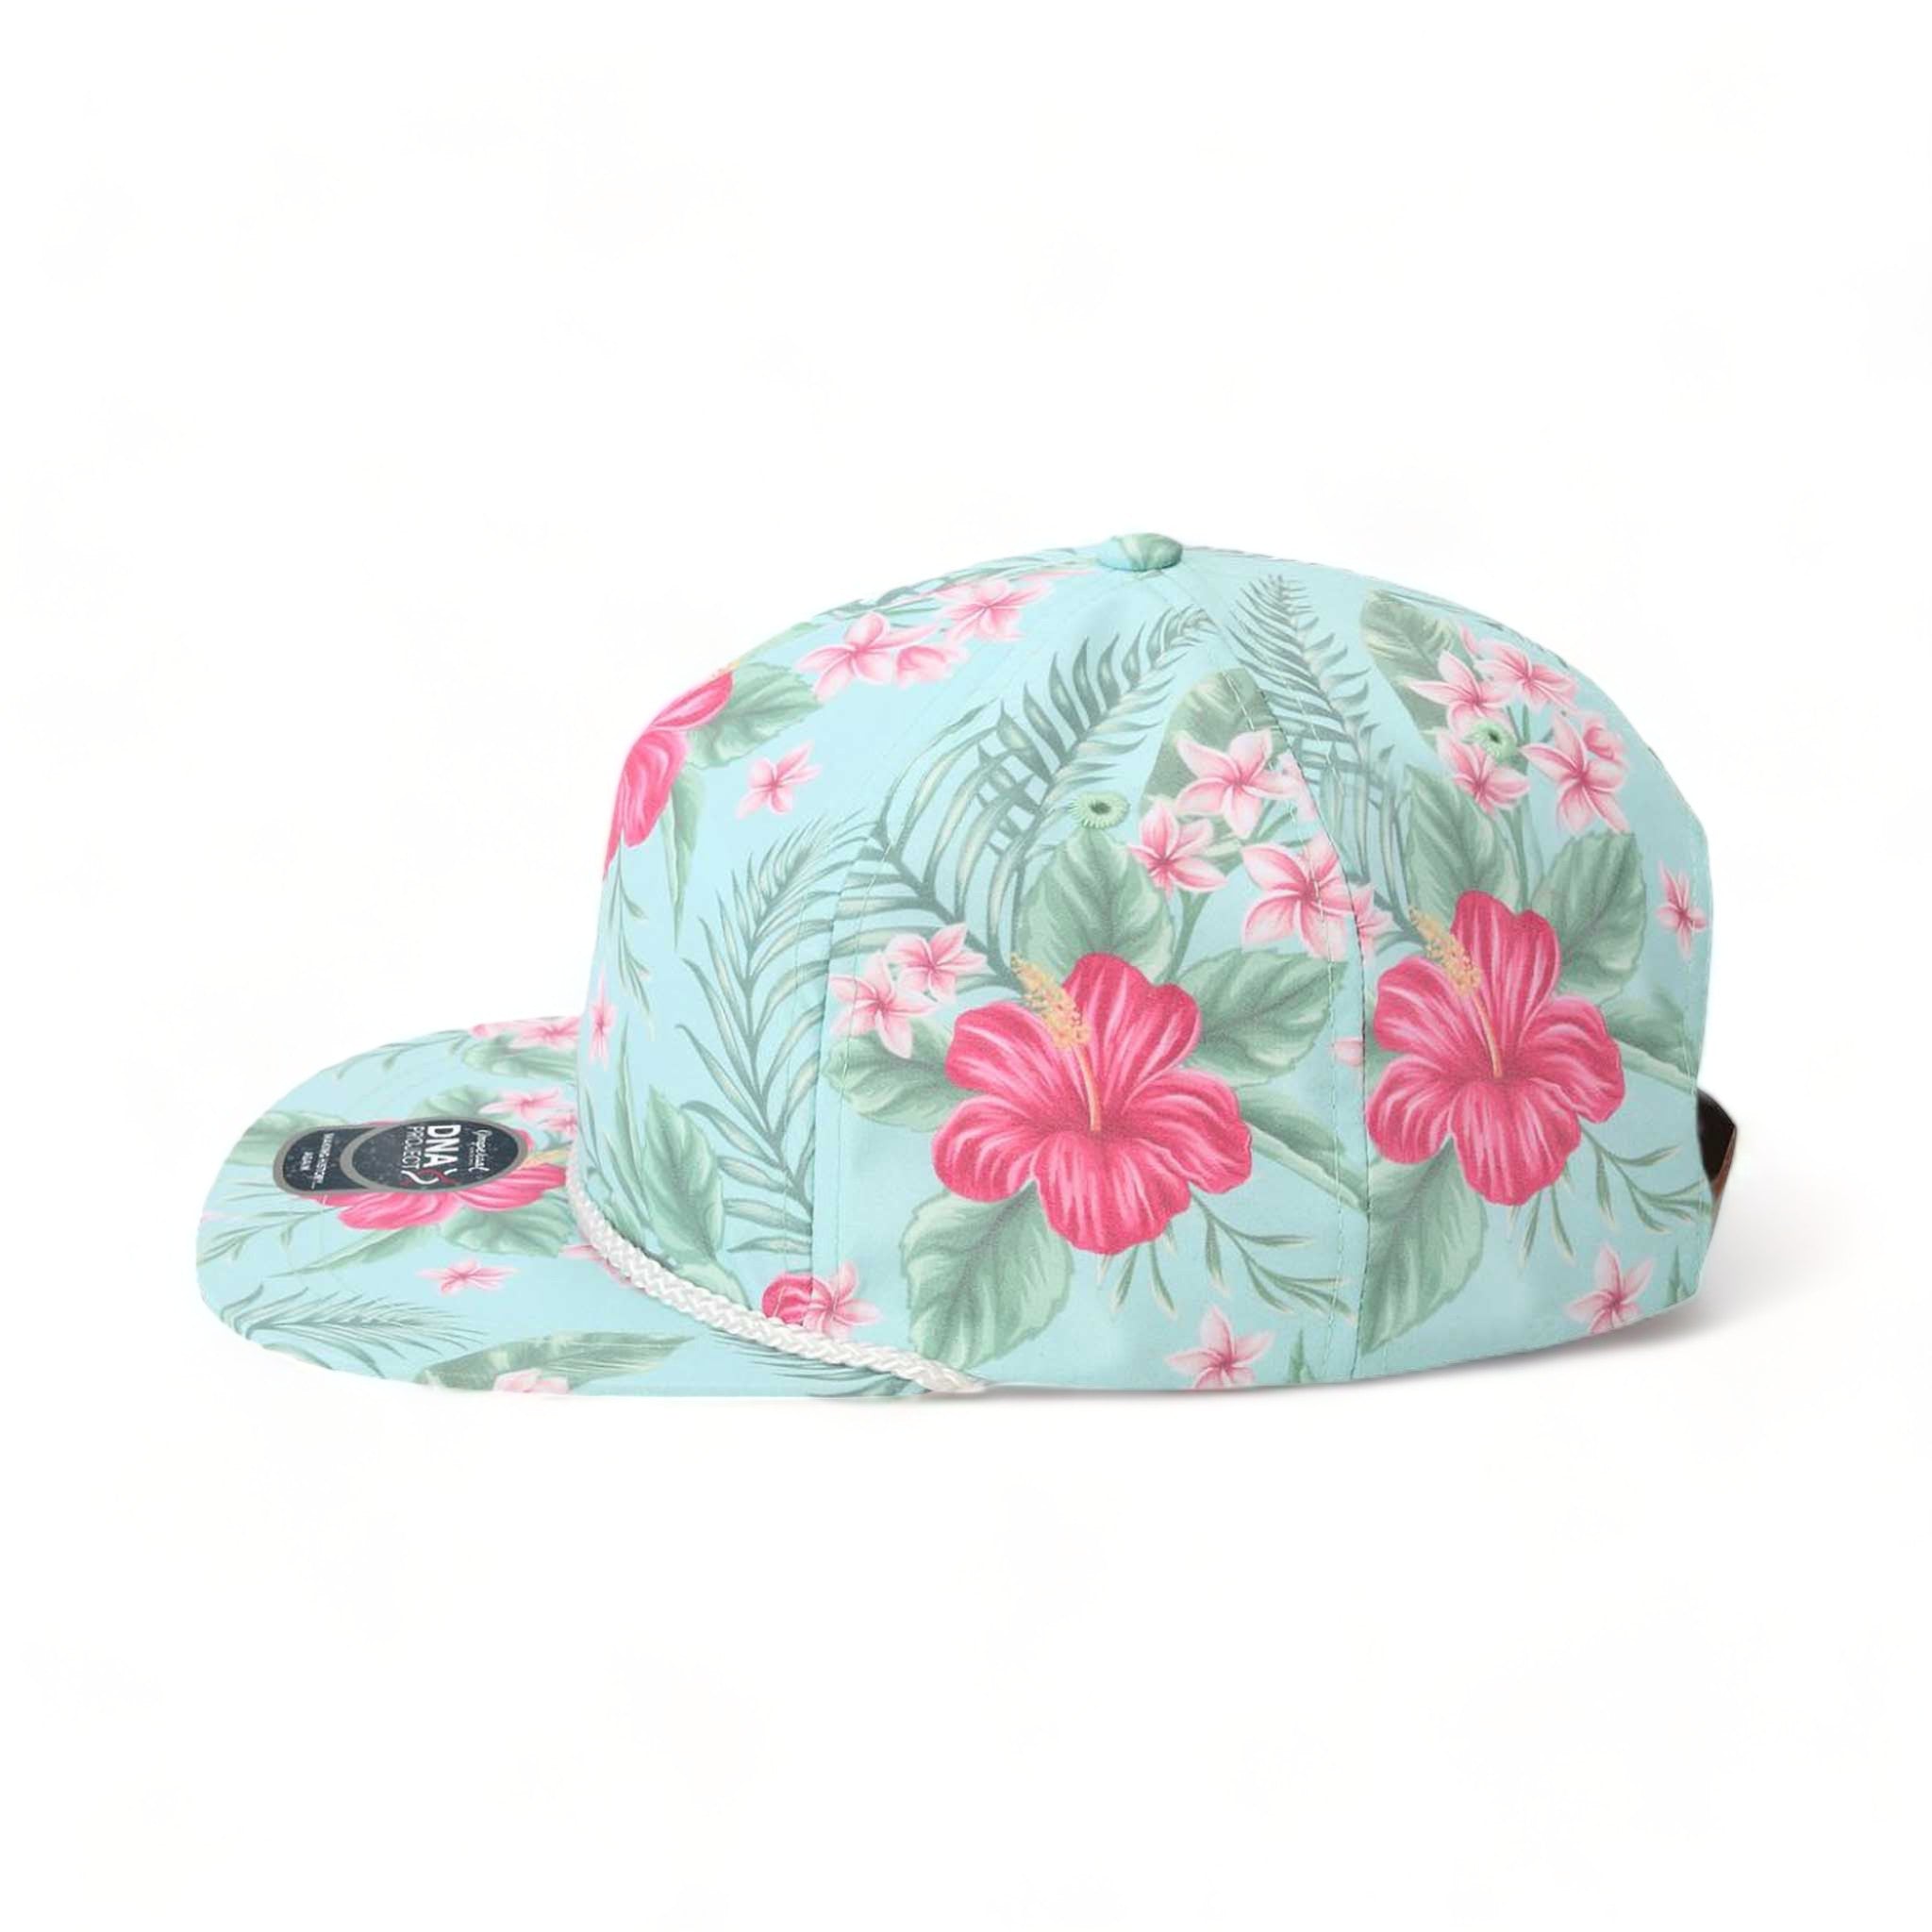 Side view of Imperial DNA010 custom hat in hawai'in biome